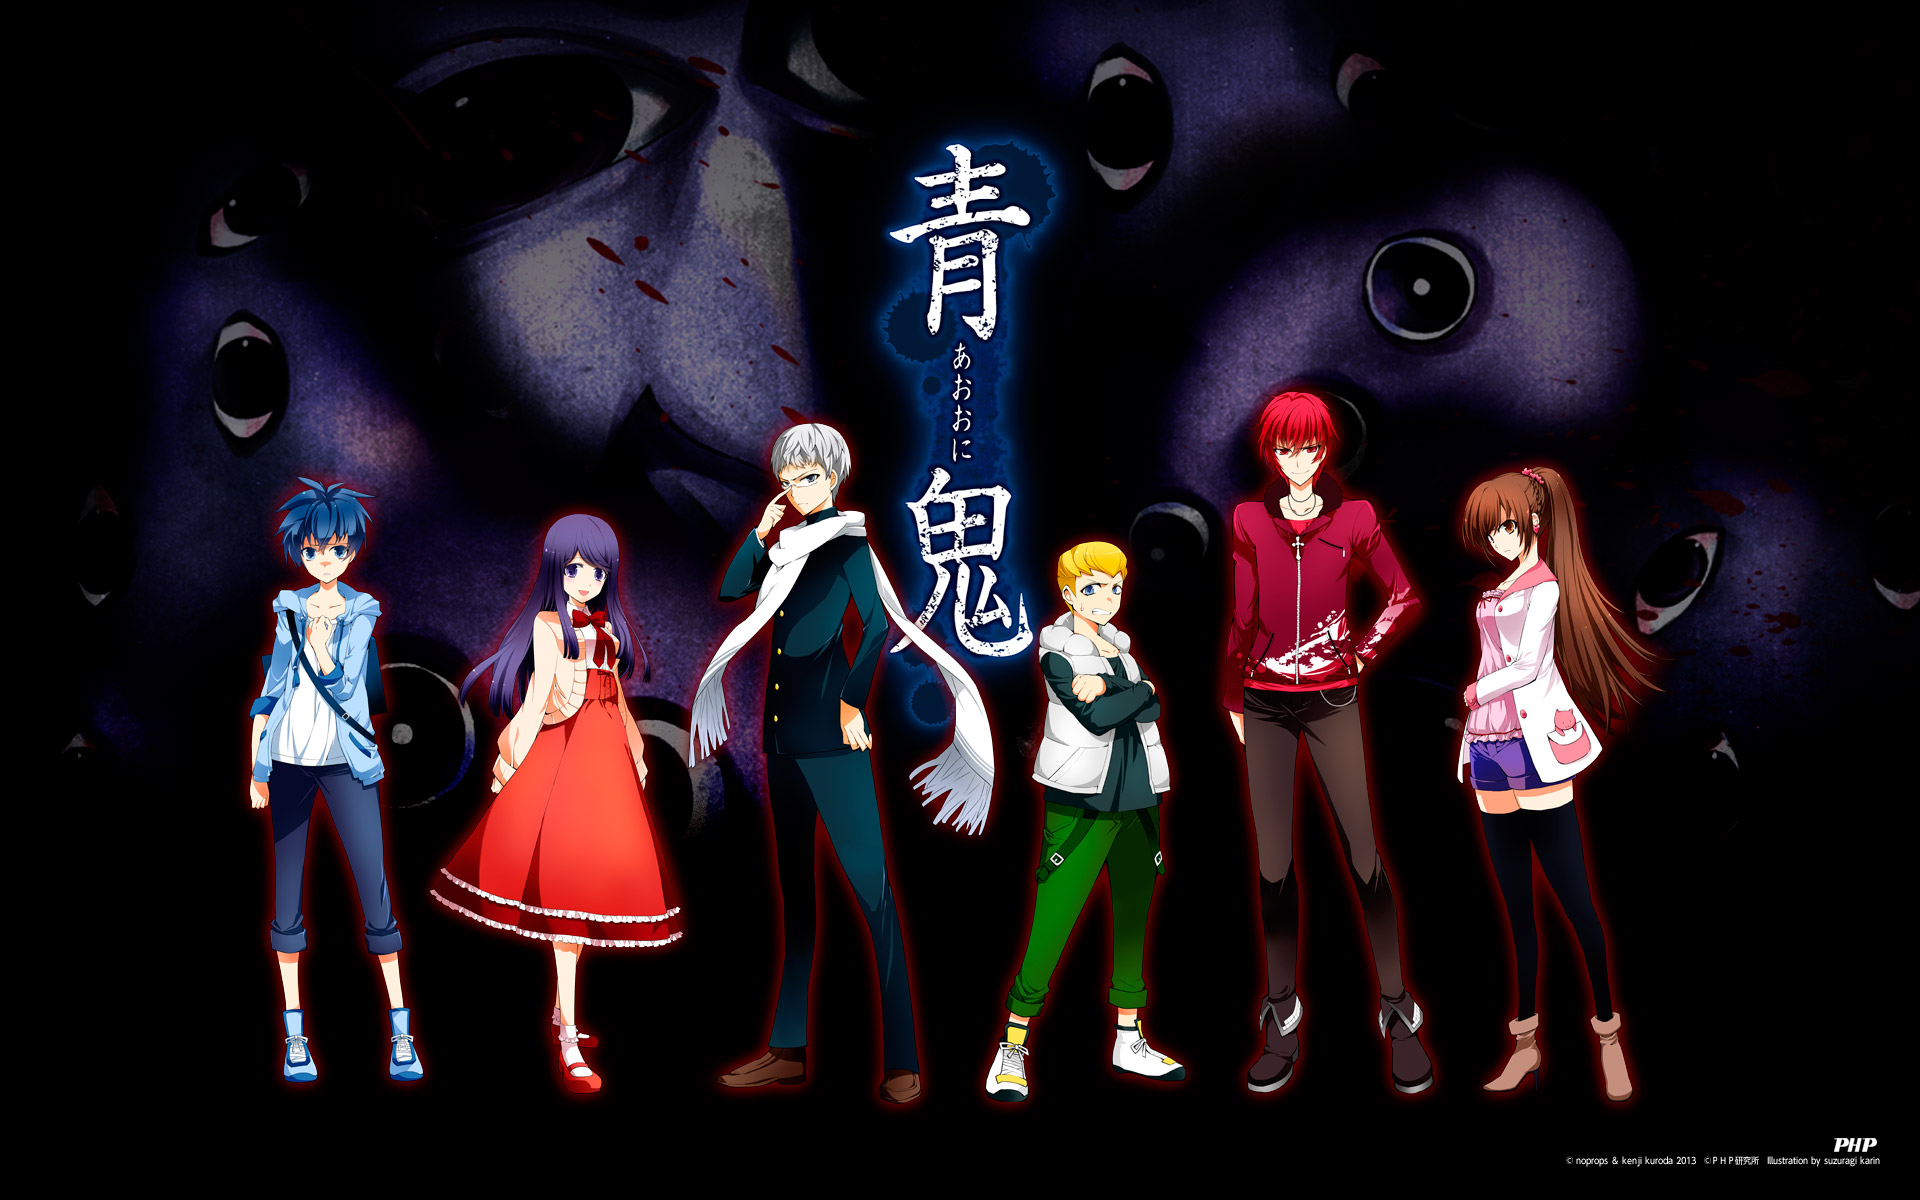 Images of Ao Oni | 1920x1200